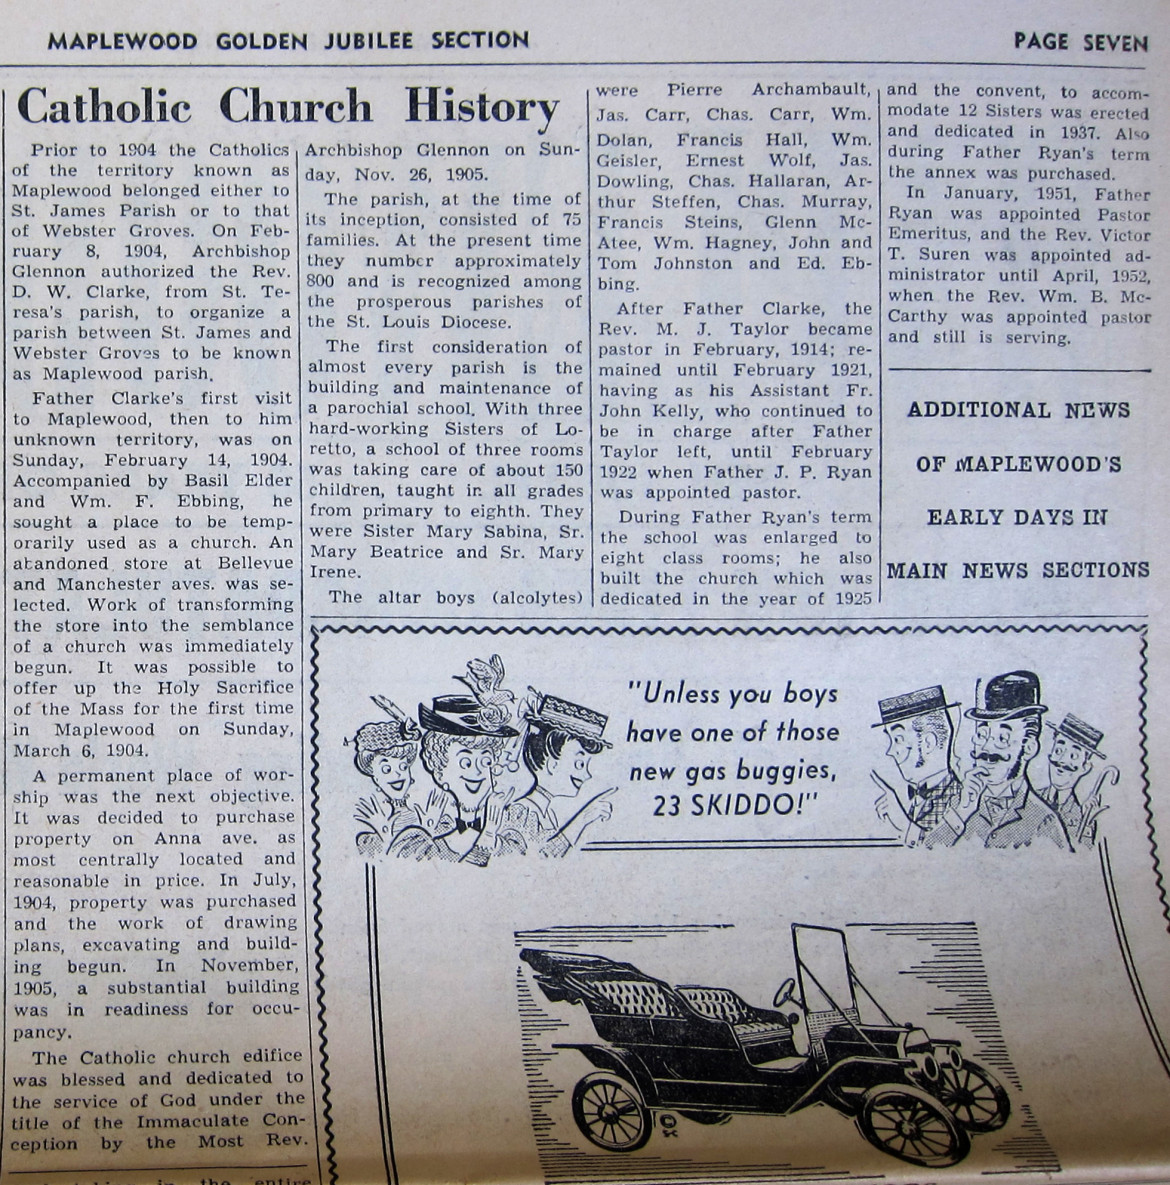 First a little history.  this article is from The Observer newspaper, Sept. 10, 1958.  This edition featured the Maplewood's 50th anniversary called the Golden Jubilee.  Courtesy of the Maplewood Public Library.